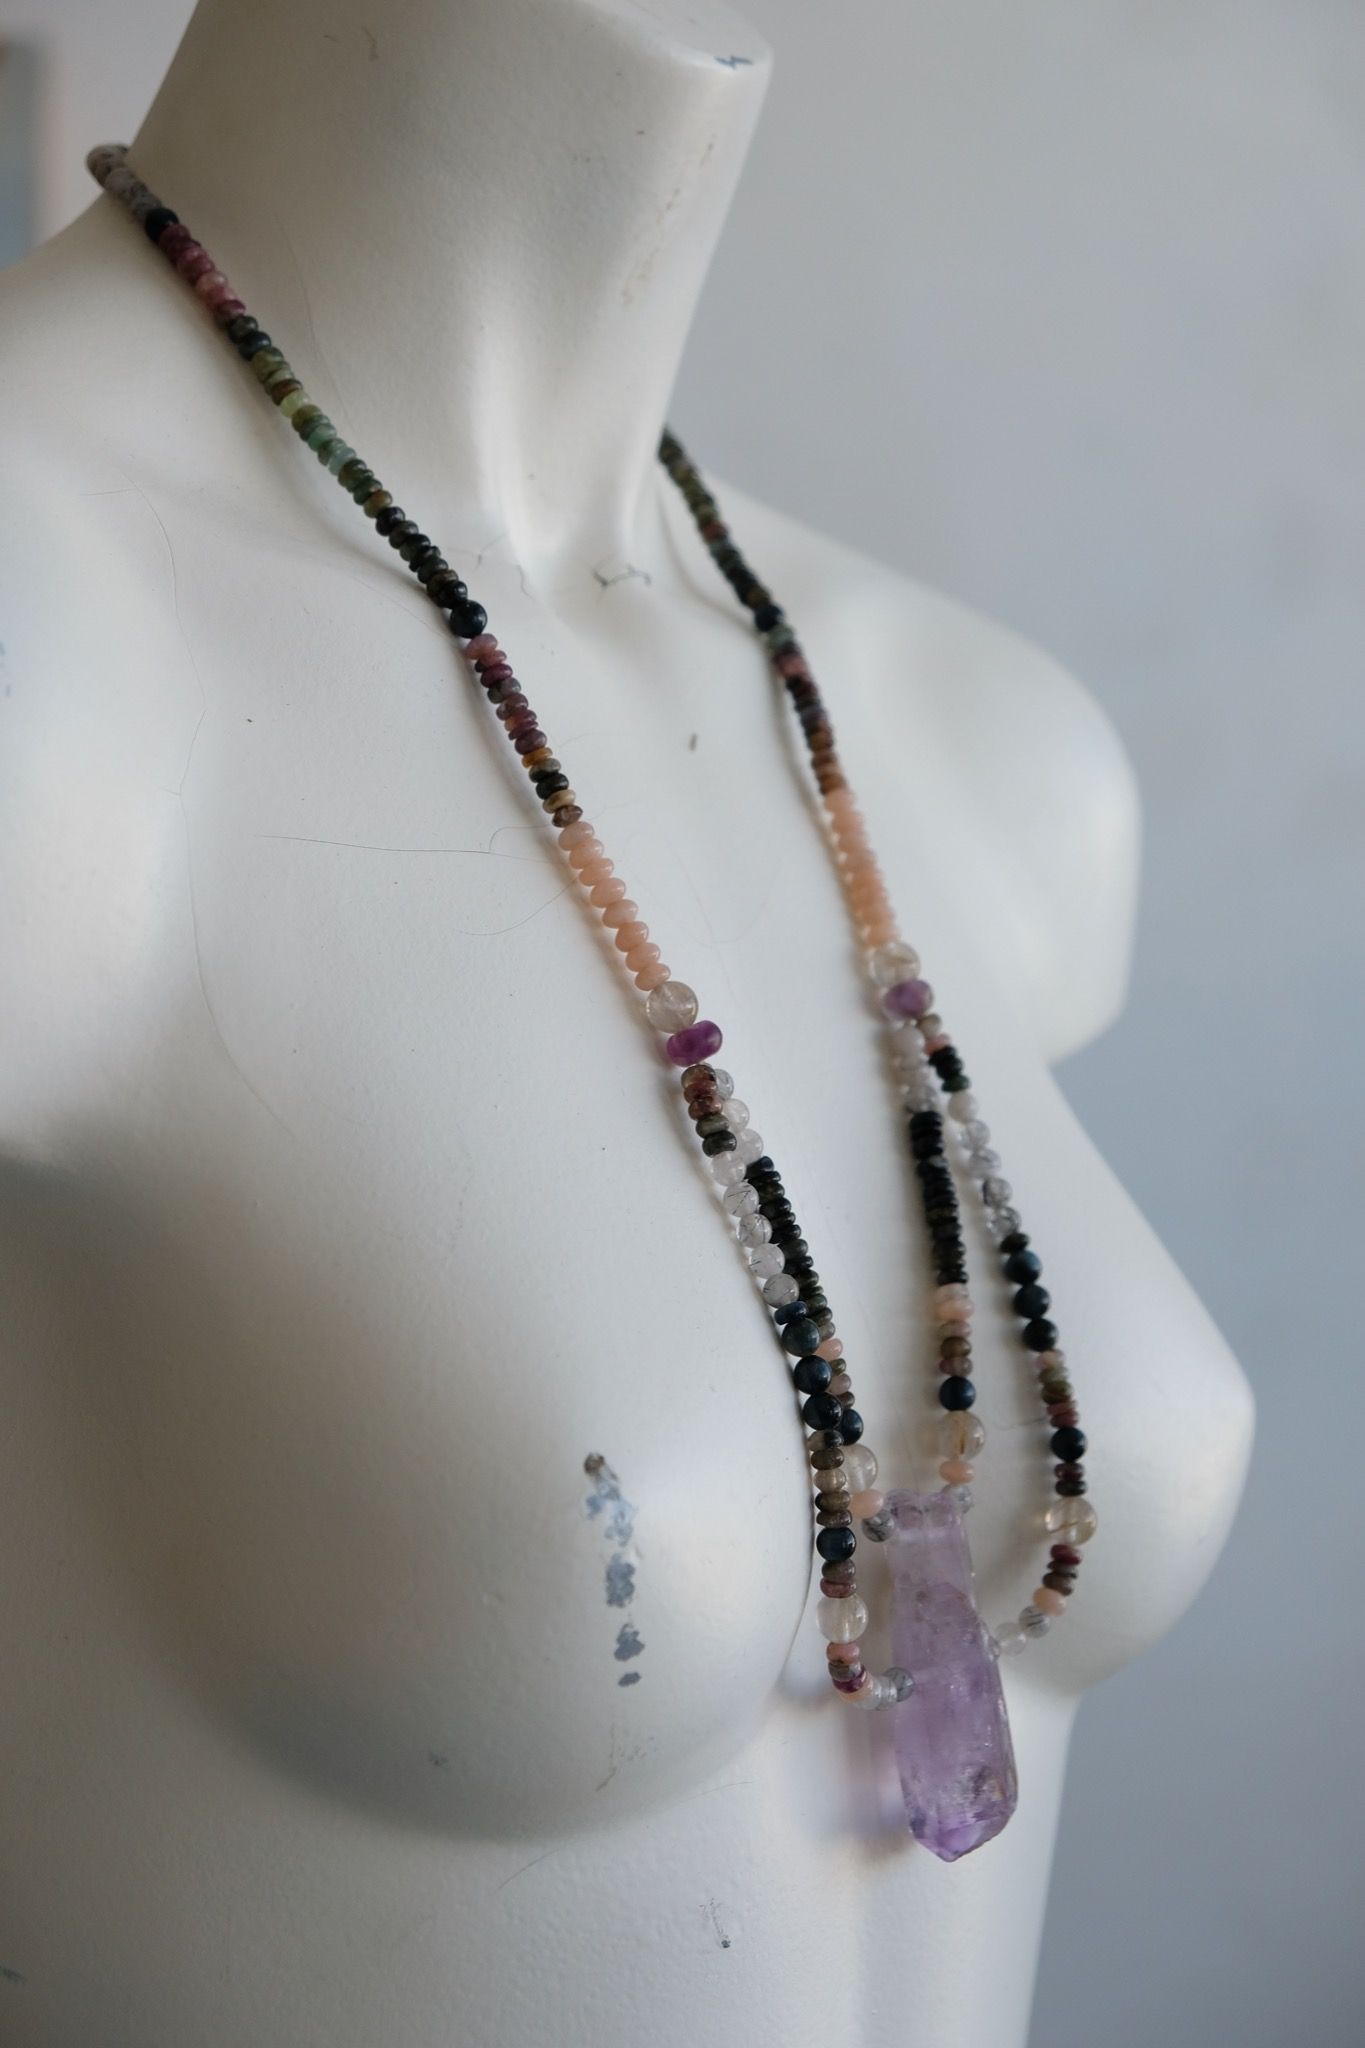 a white mannequin wearing a necklace with a purple amethyst centerpiece and stone beads in subtle shades of pink, grey, black, clear and green